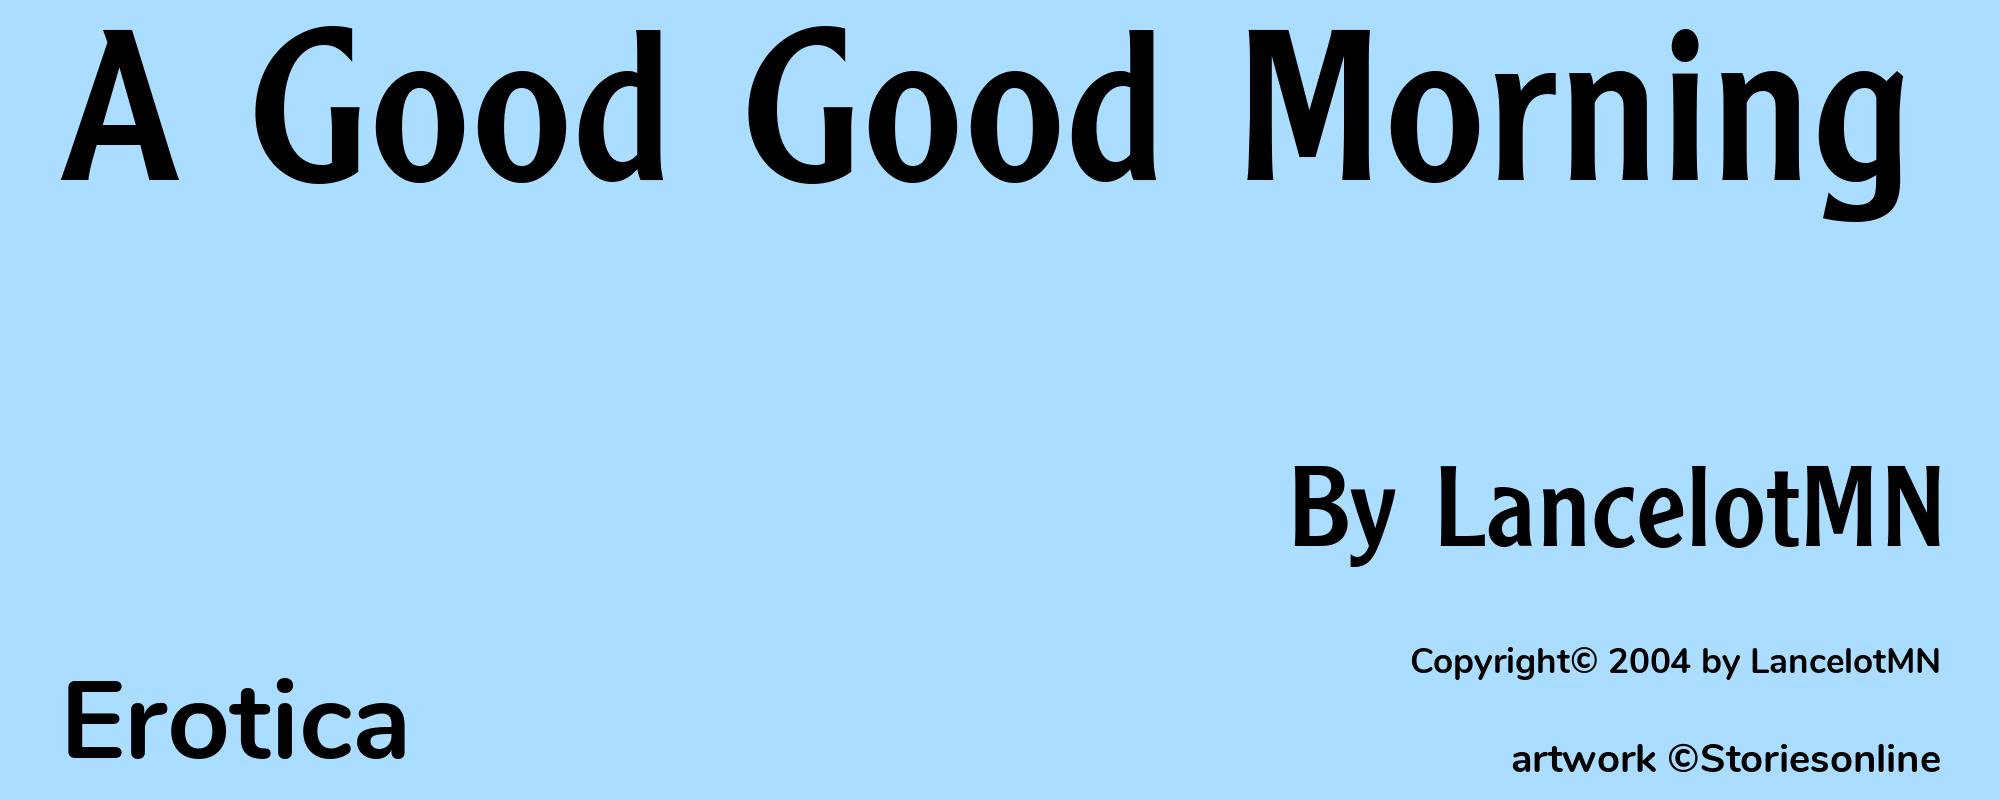 A Good Good Morning - Cover